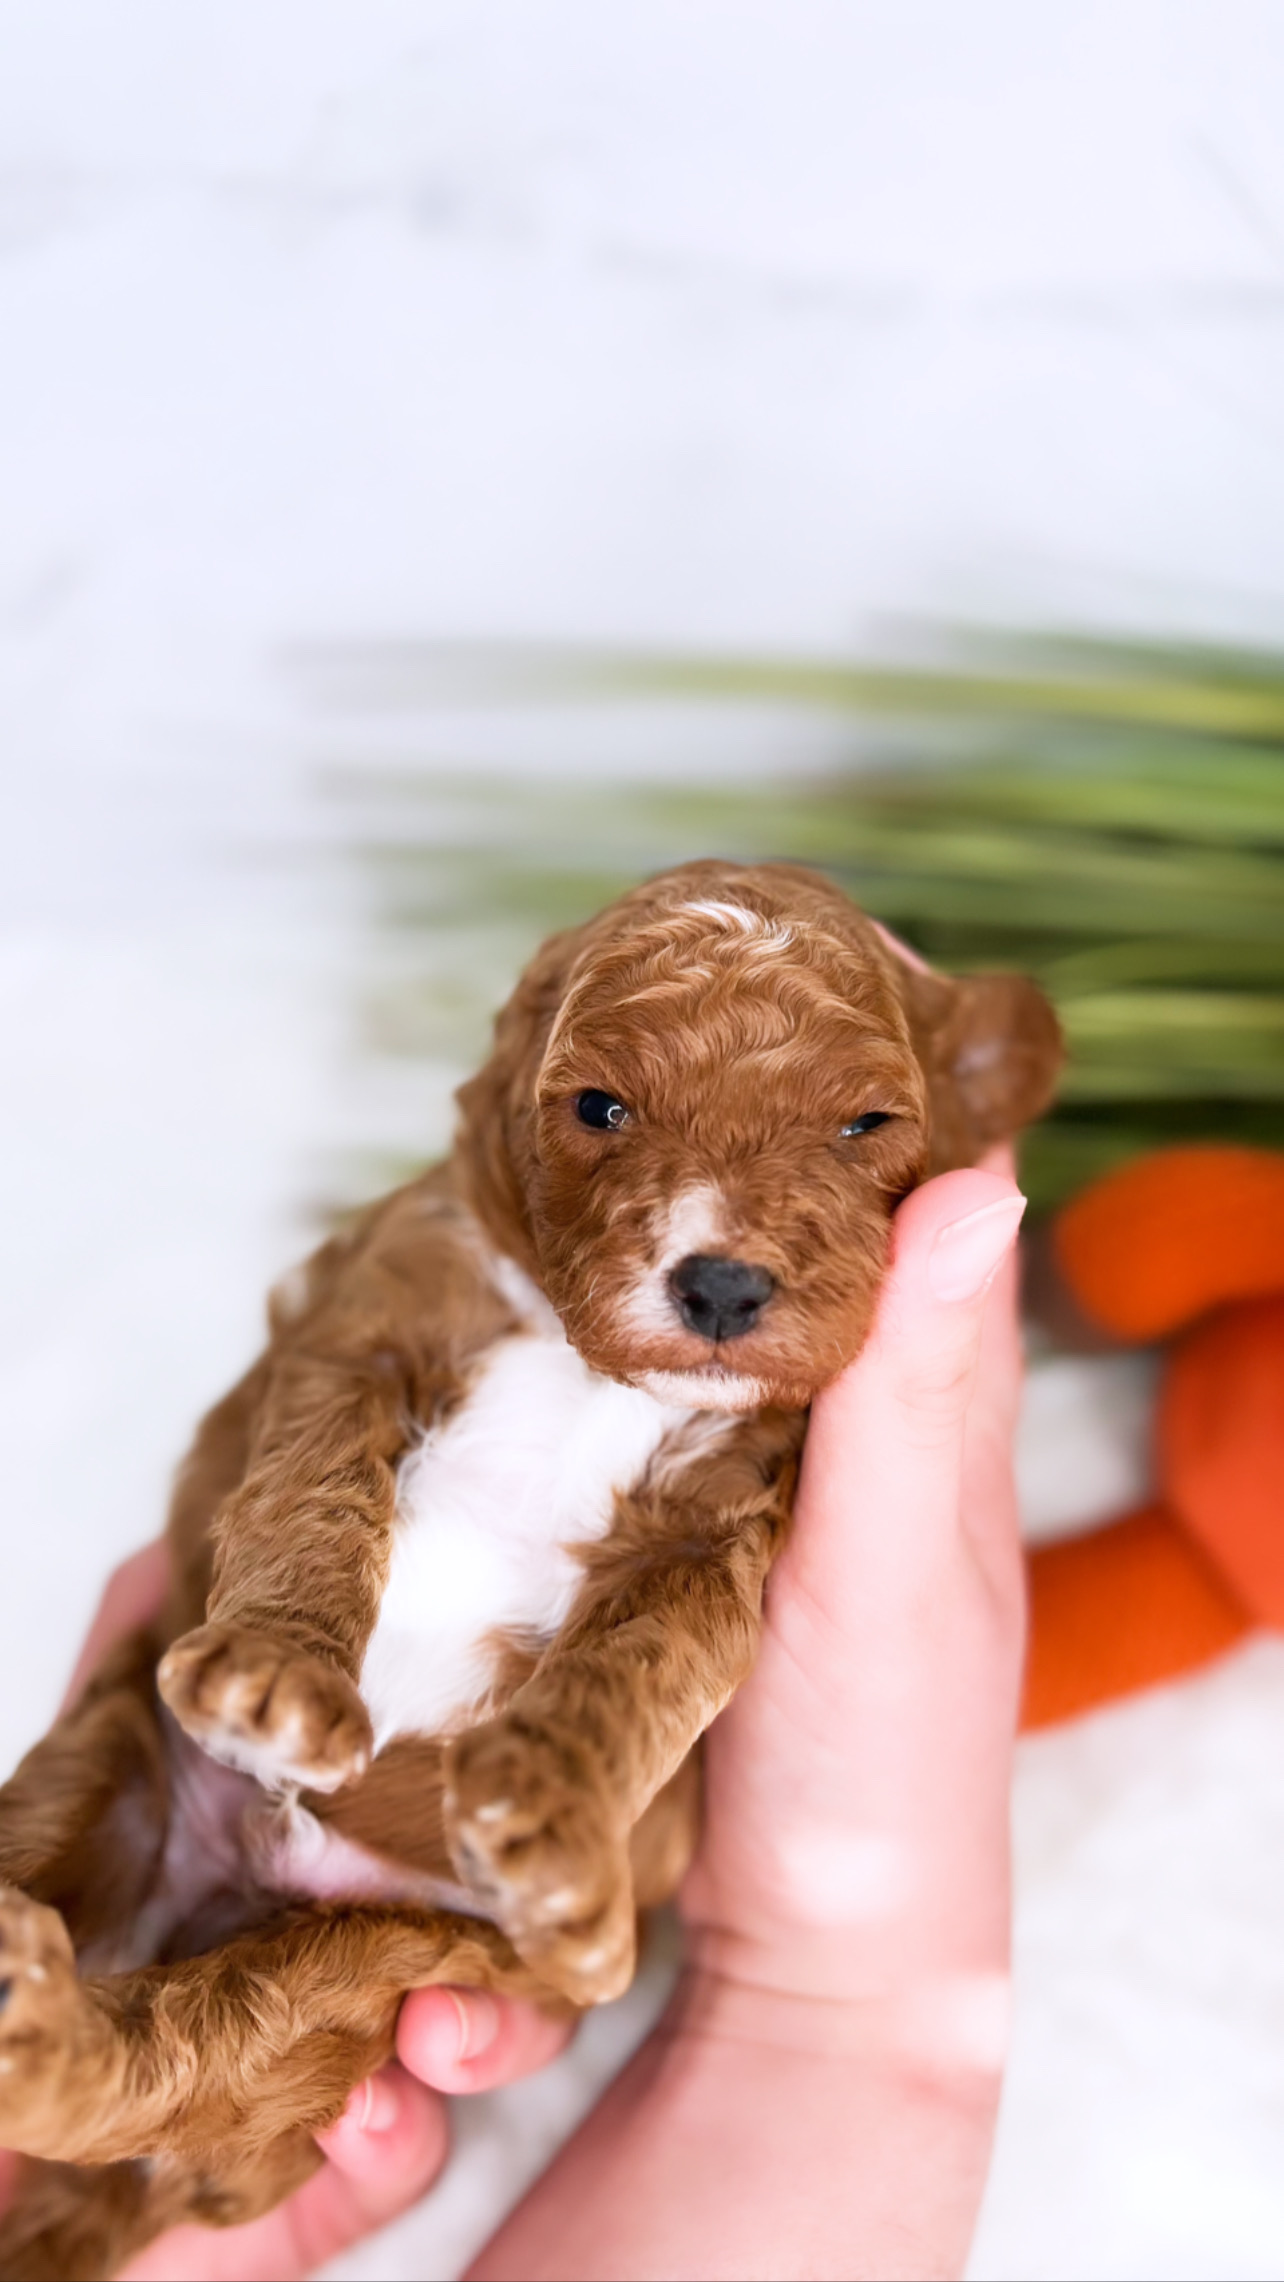 A person gently cradling a small Male teacup Cavapoo in their arms, with a backdrop of fresh carrots in the background.